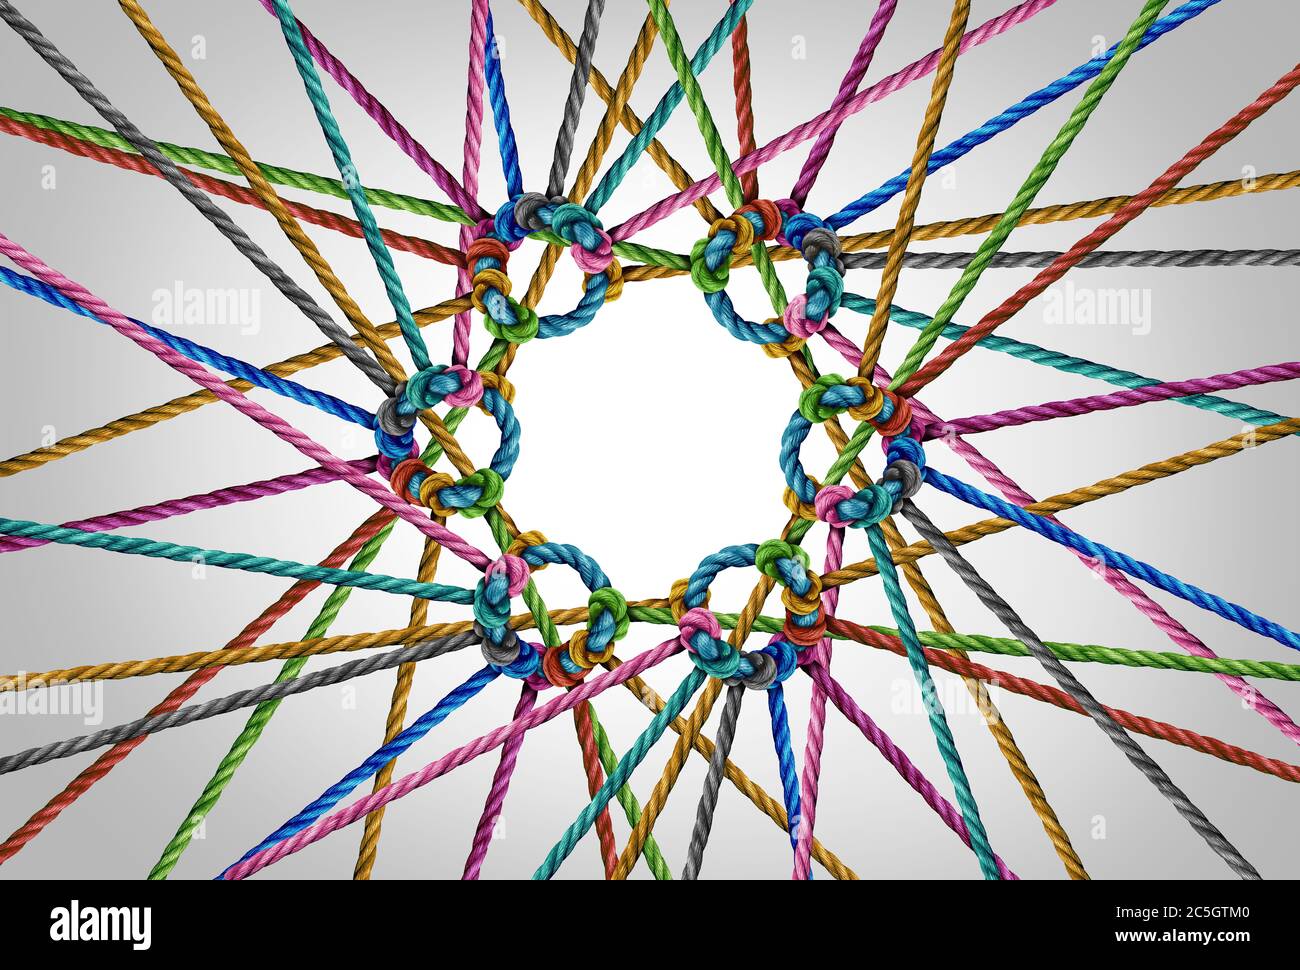 Group unity concept and teamwork as a business metaphor for joining a team as diverse groups of ropes connected together as a corporate symbol. Stock Photo